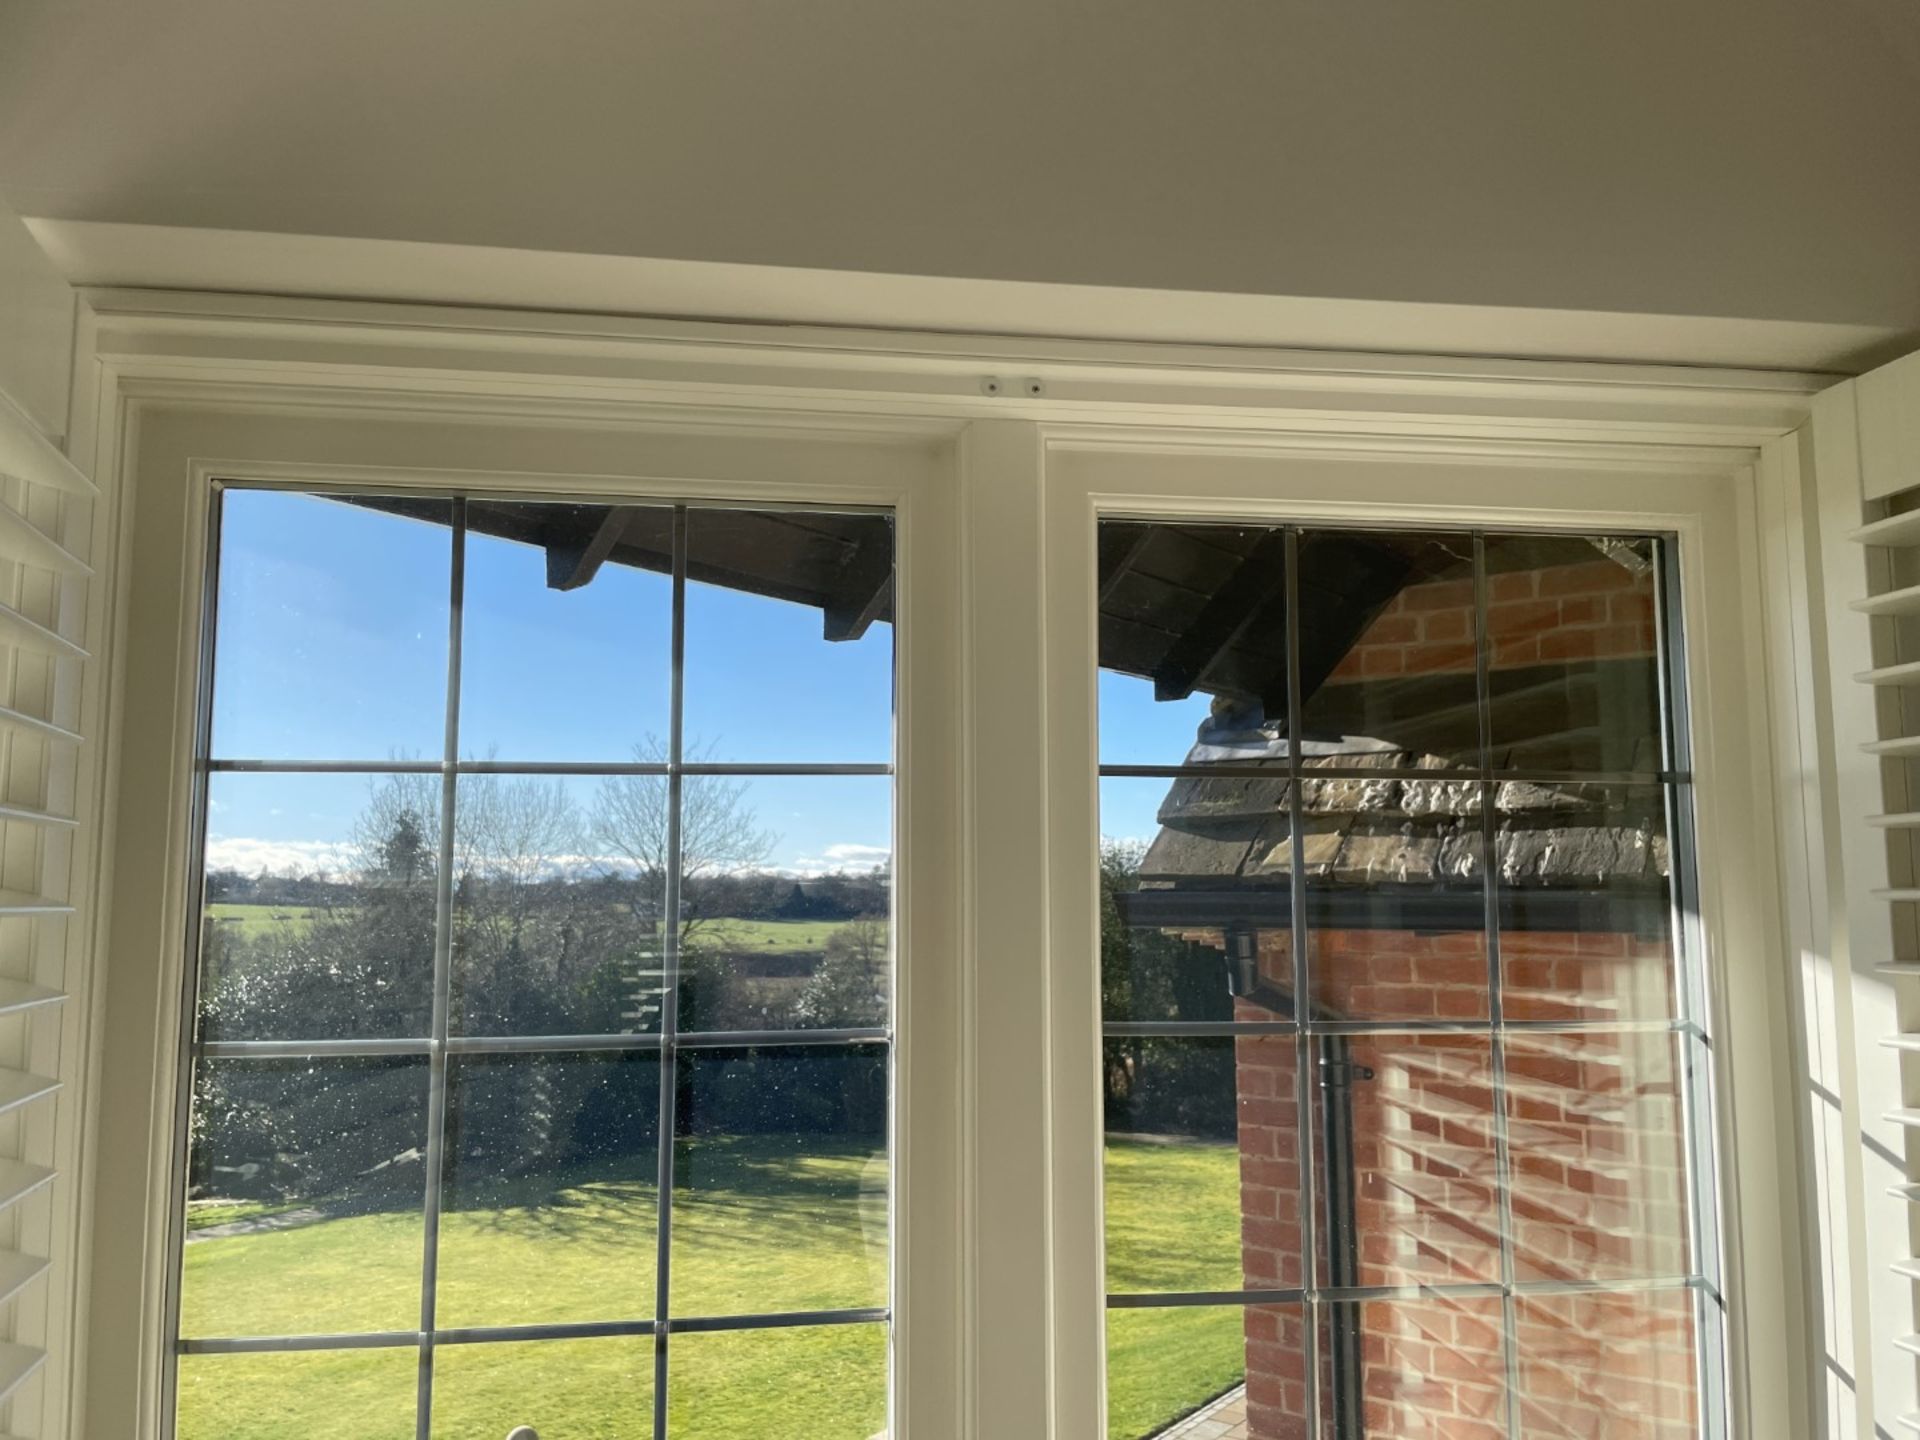 1 x Hardwood Timber Double Glazed Leaded 2-Pane Window Frame fitted with Shutter Blinds - Ref: - Image 10 of 12